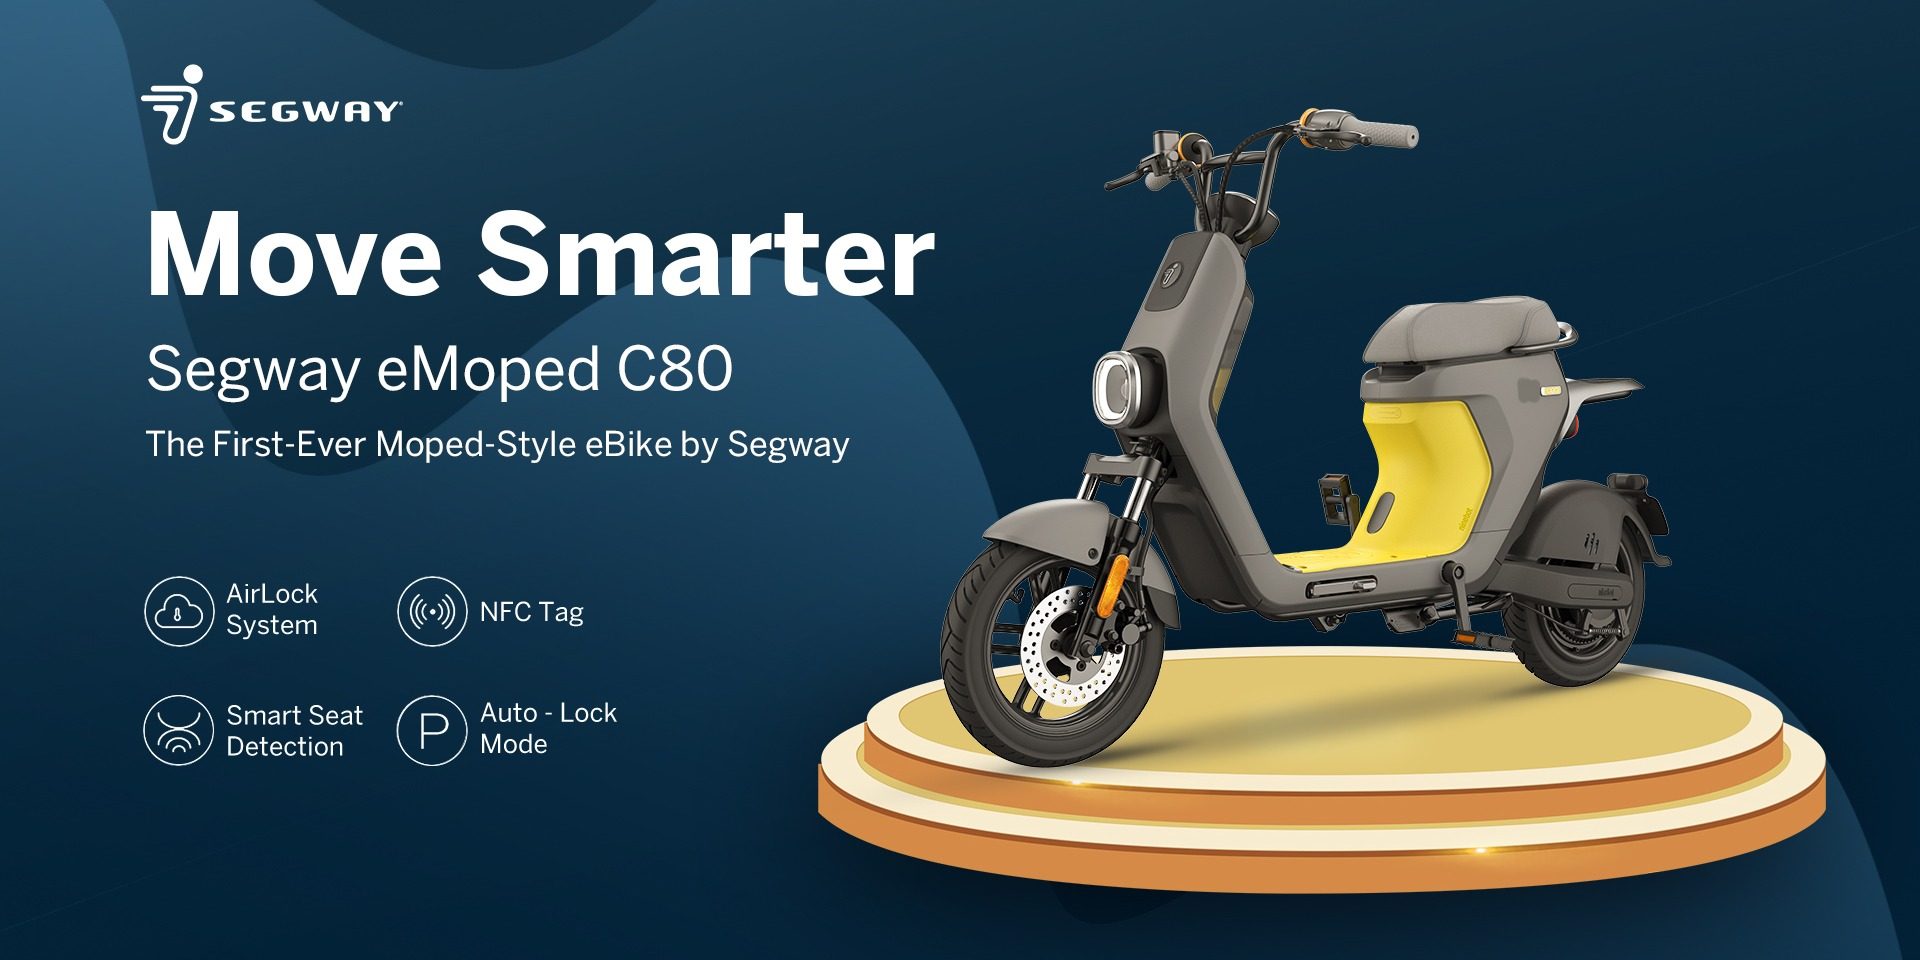 Segway C80 electric moped launched with 50 mile range, affordable price - Blog - 13